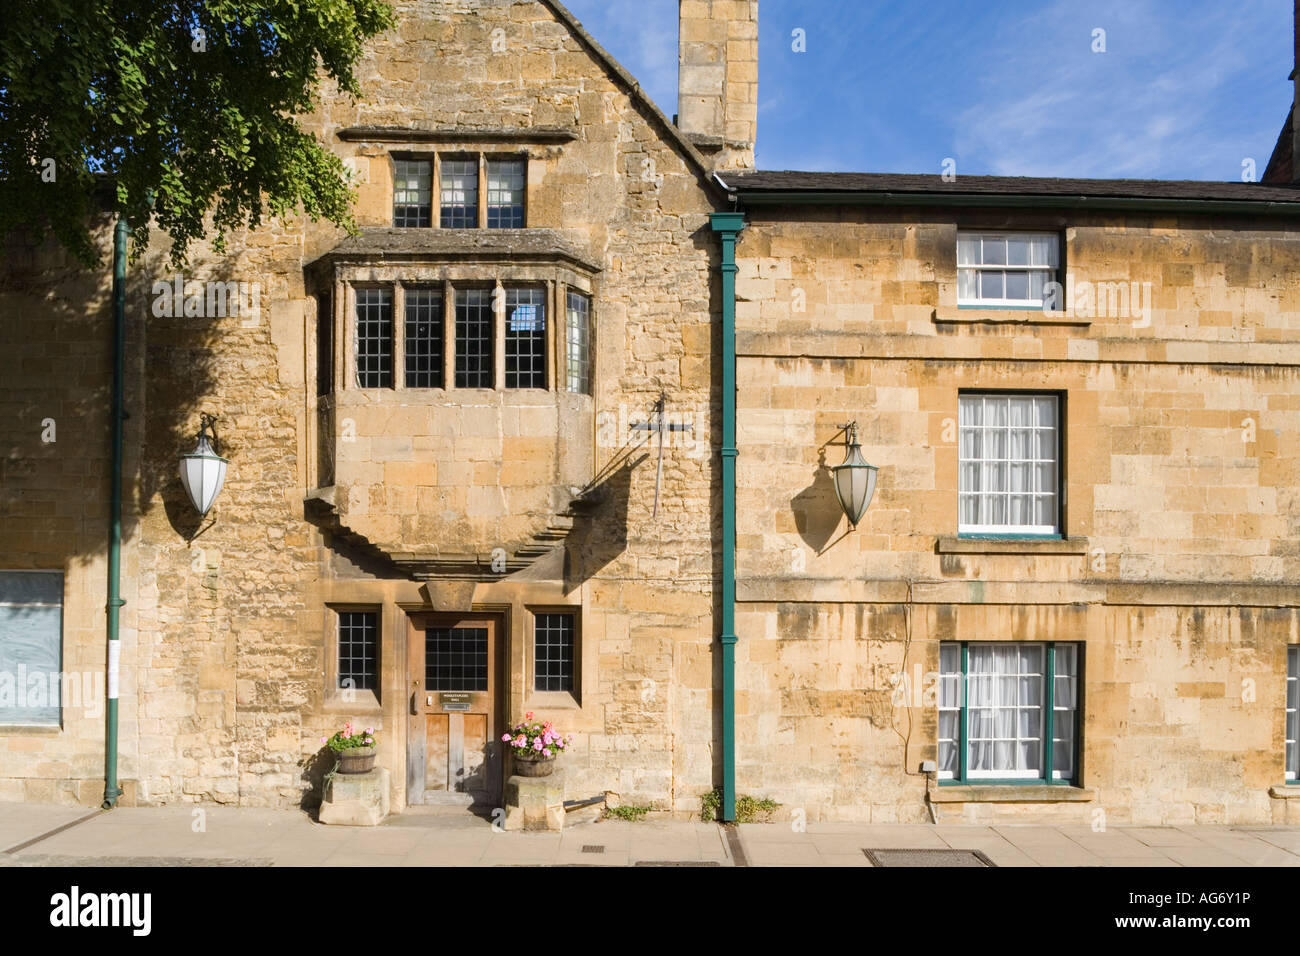 The fourteenth century Woolstaplers Hall in the Cotswold town of Chipping Campden, Gloucestershire UK Stock Photo